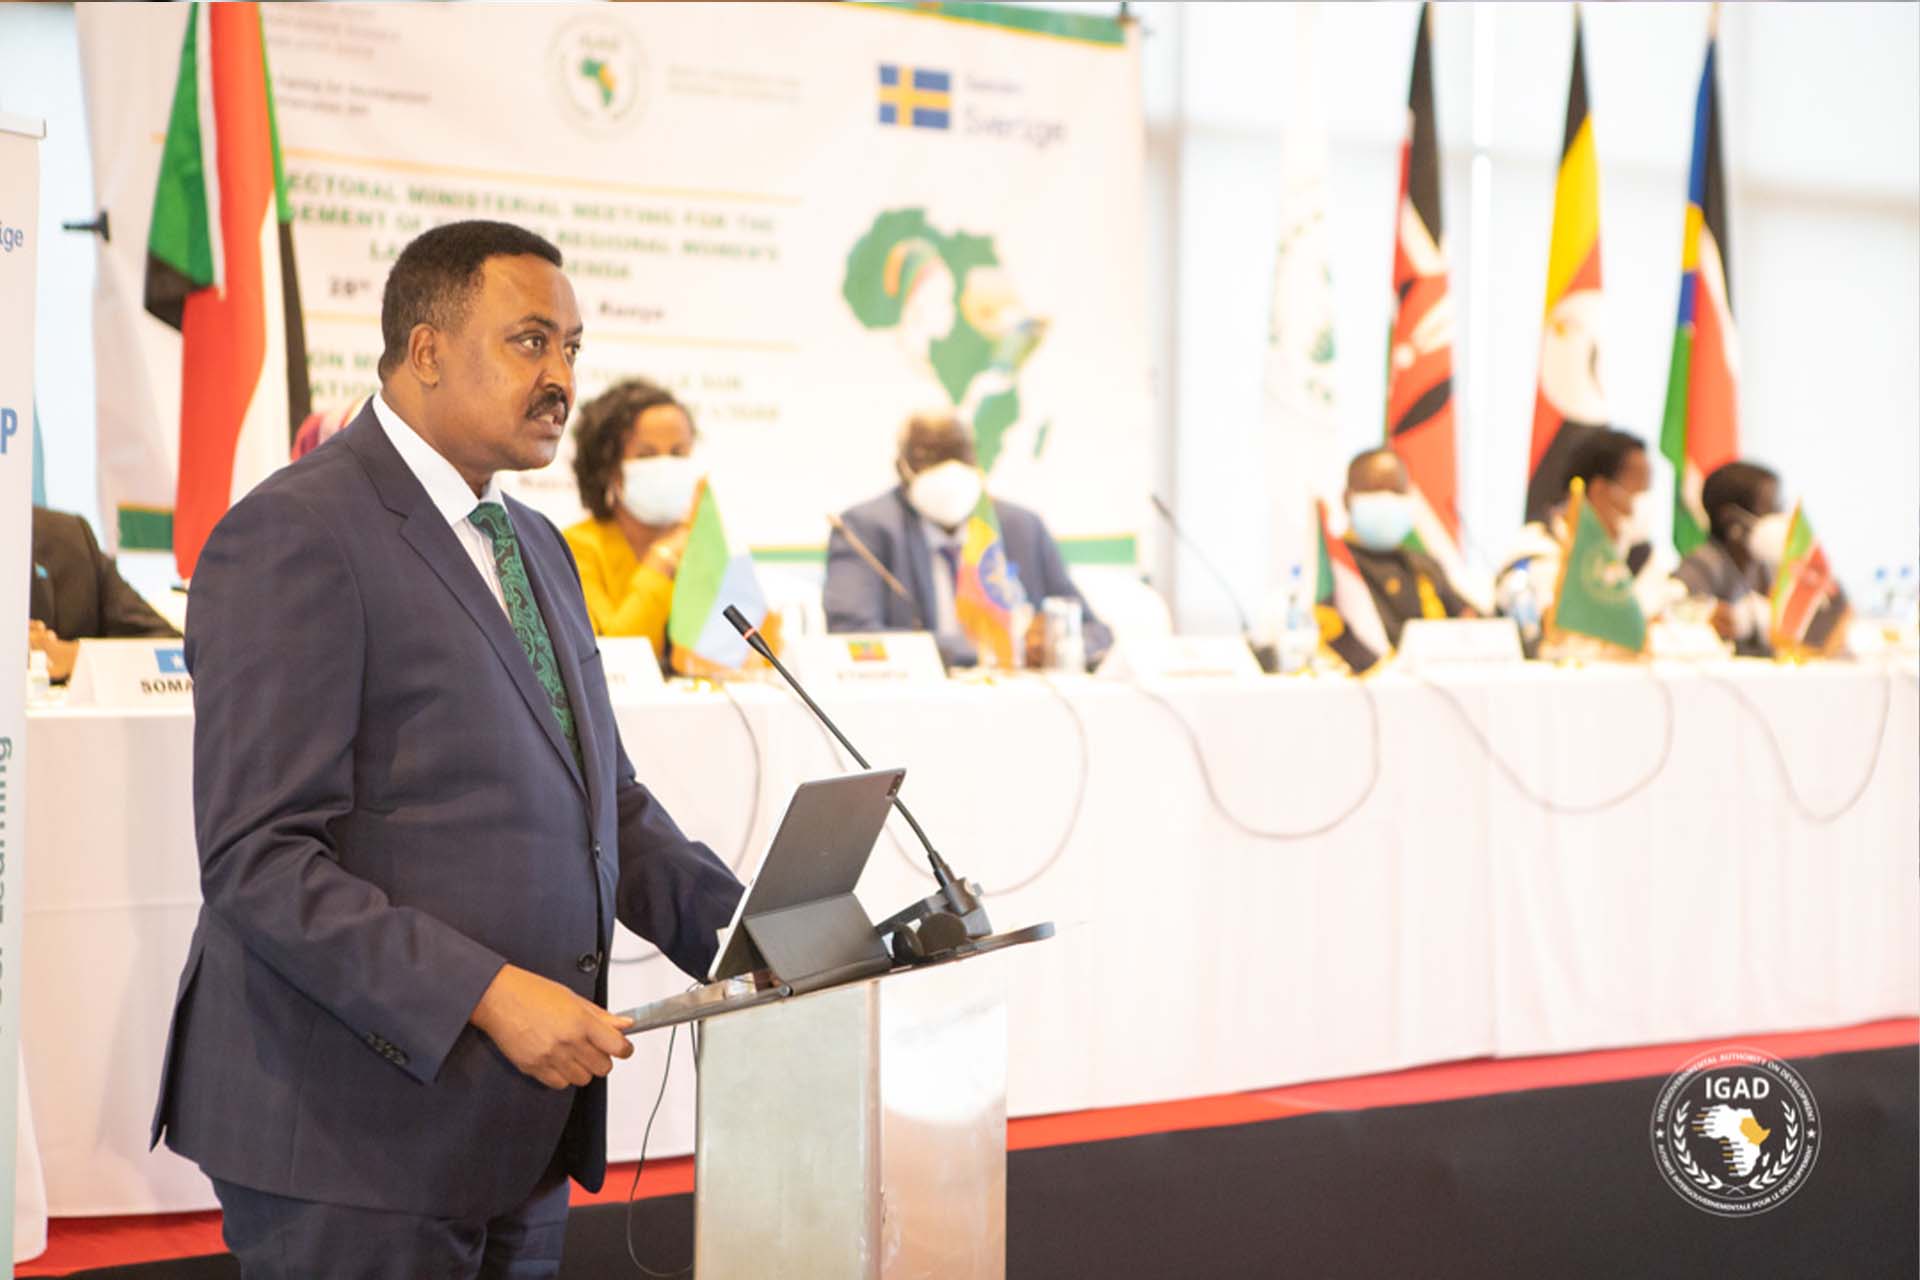 IGAD Convenes Ministerial Meeting To Advocate For Equity In Land Rights